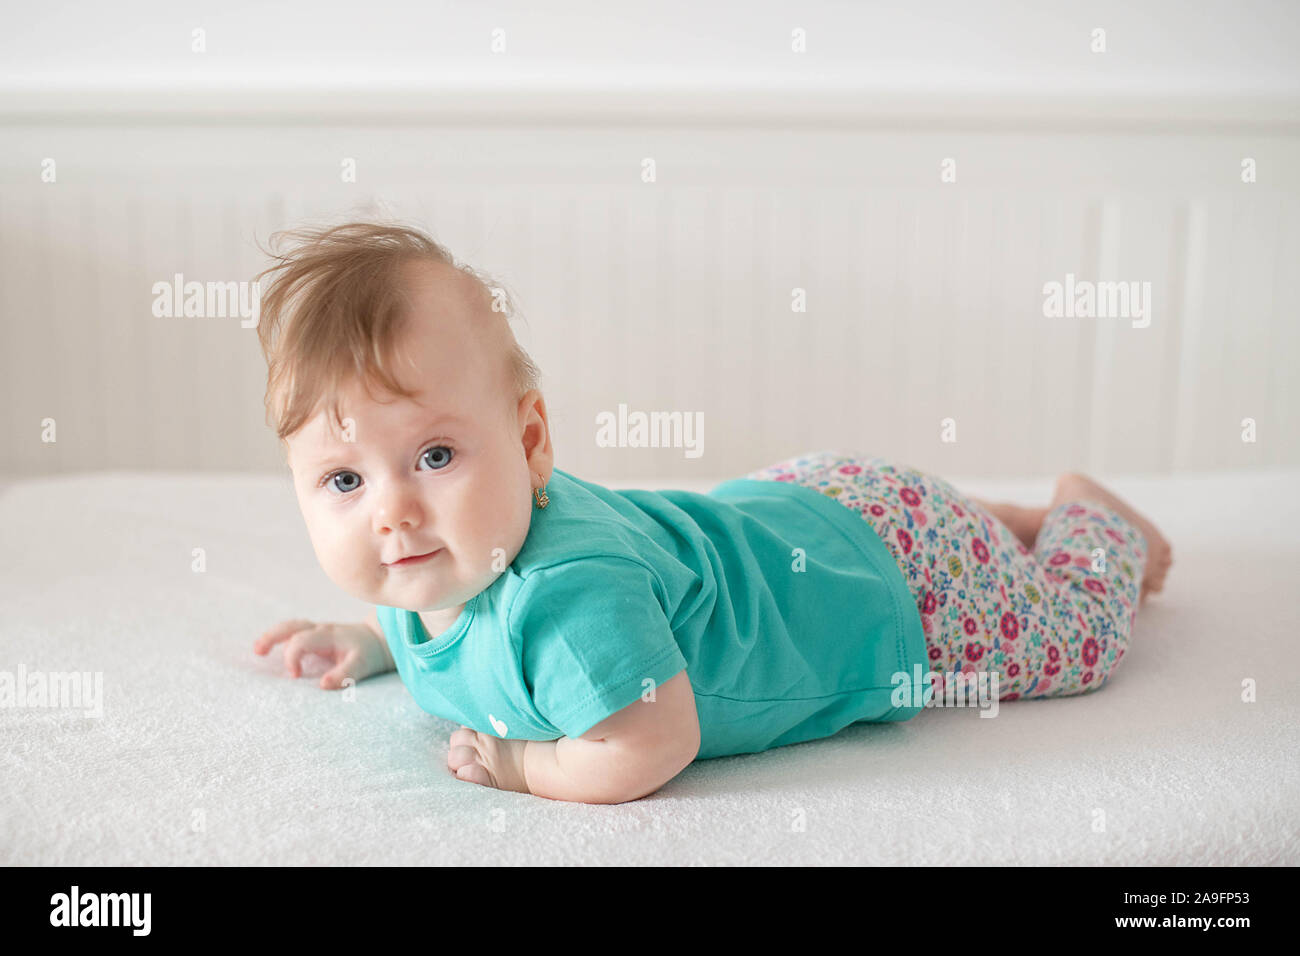 Adorable Caucasian baby girl with blue eyes trying to stand up and walk, looking at the camera calmly with a smile; cute baby facial expressions Stock Photo